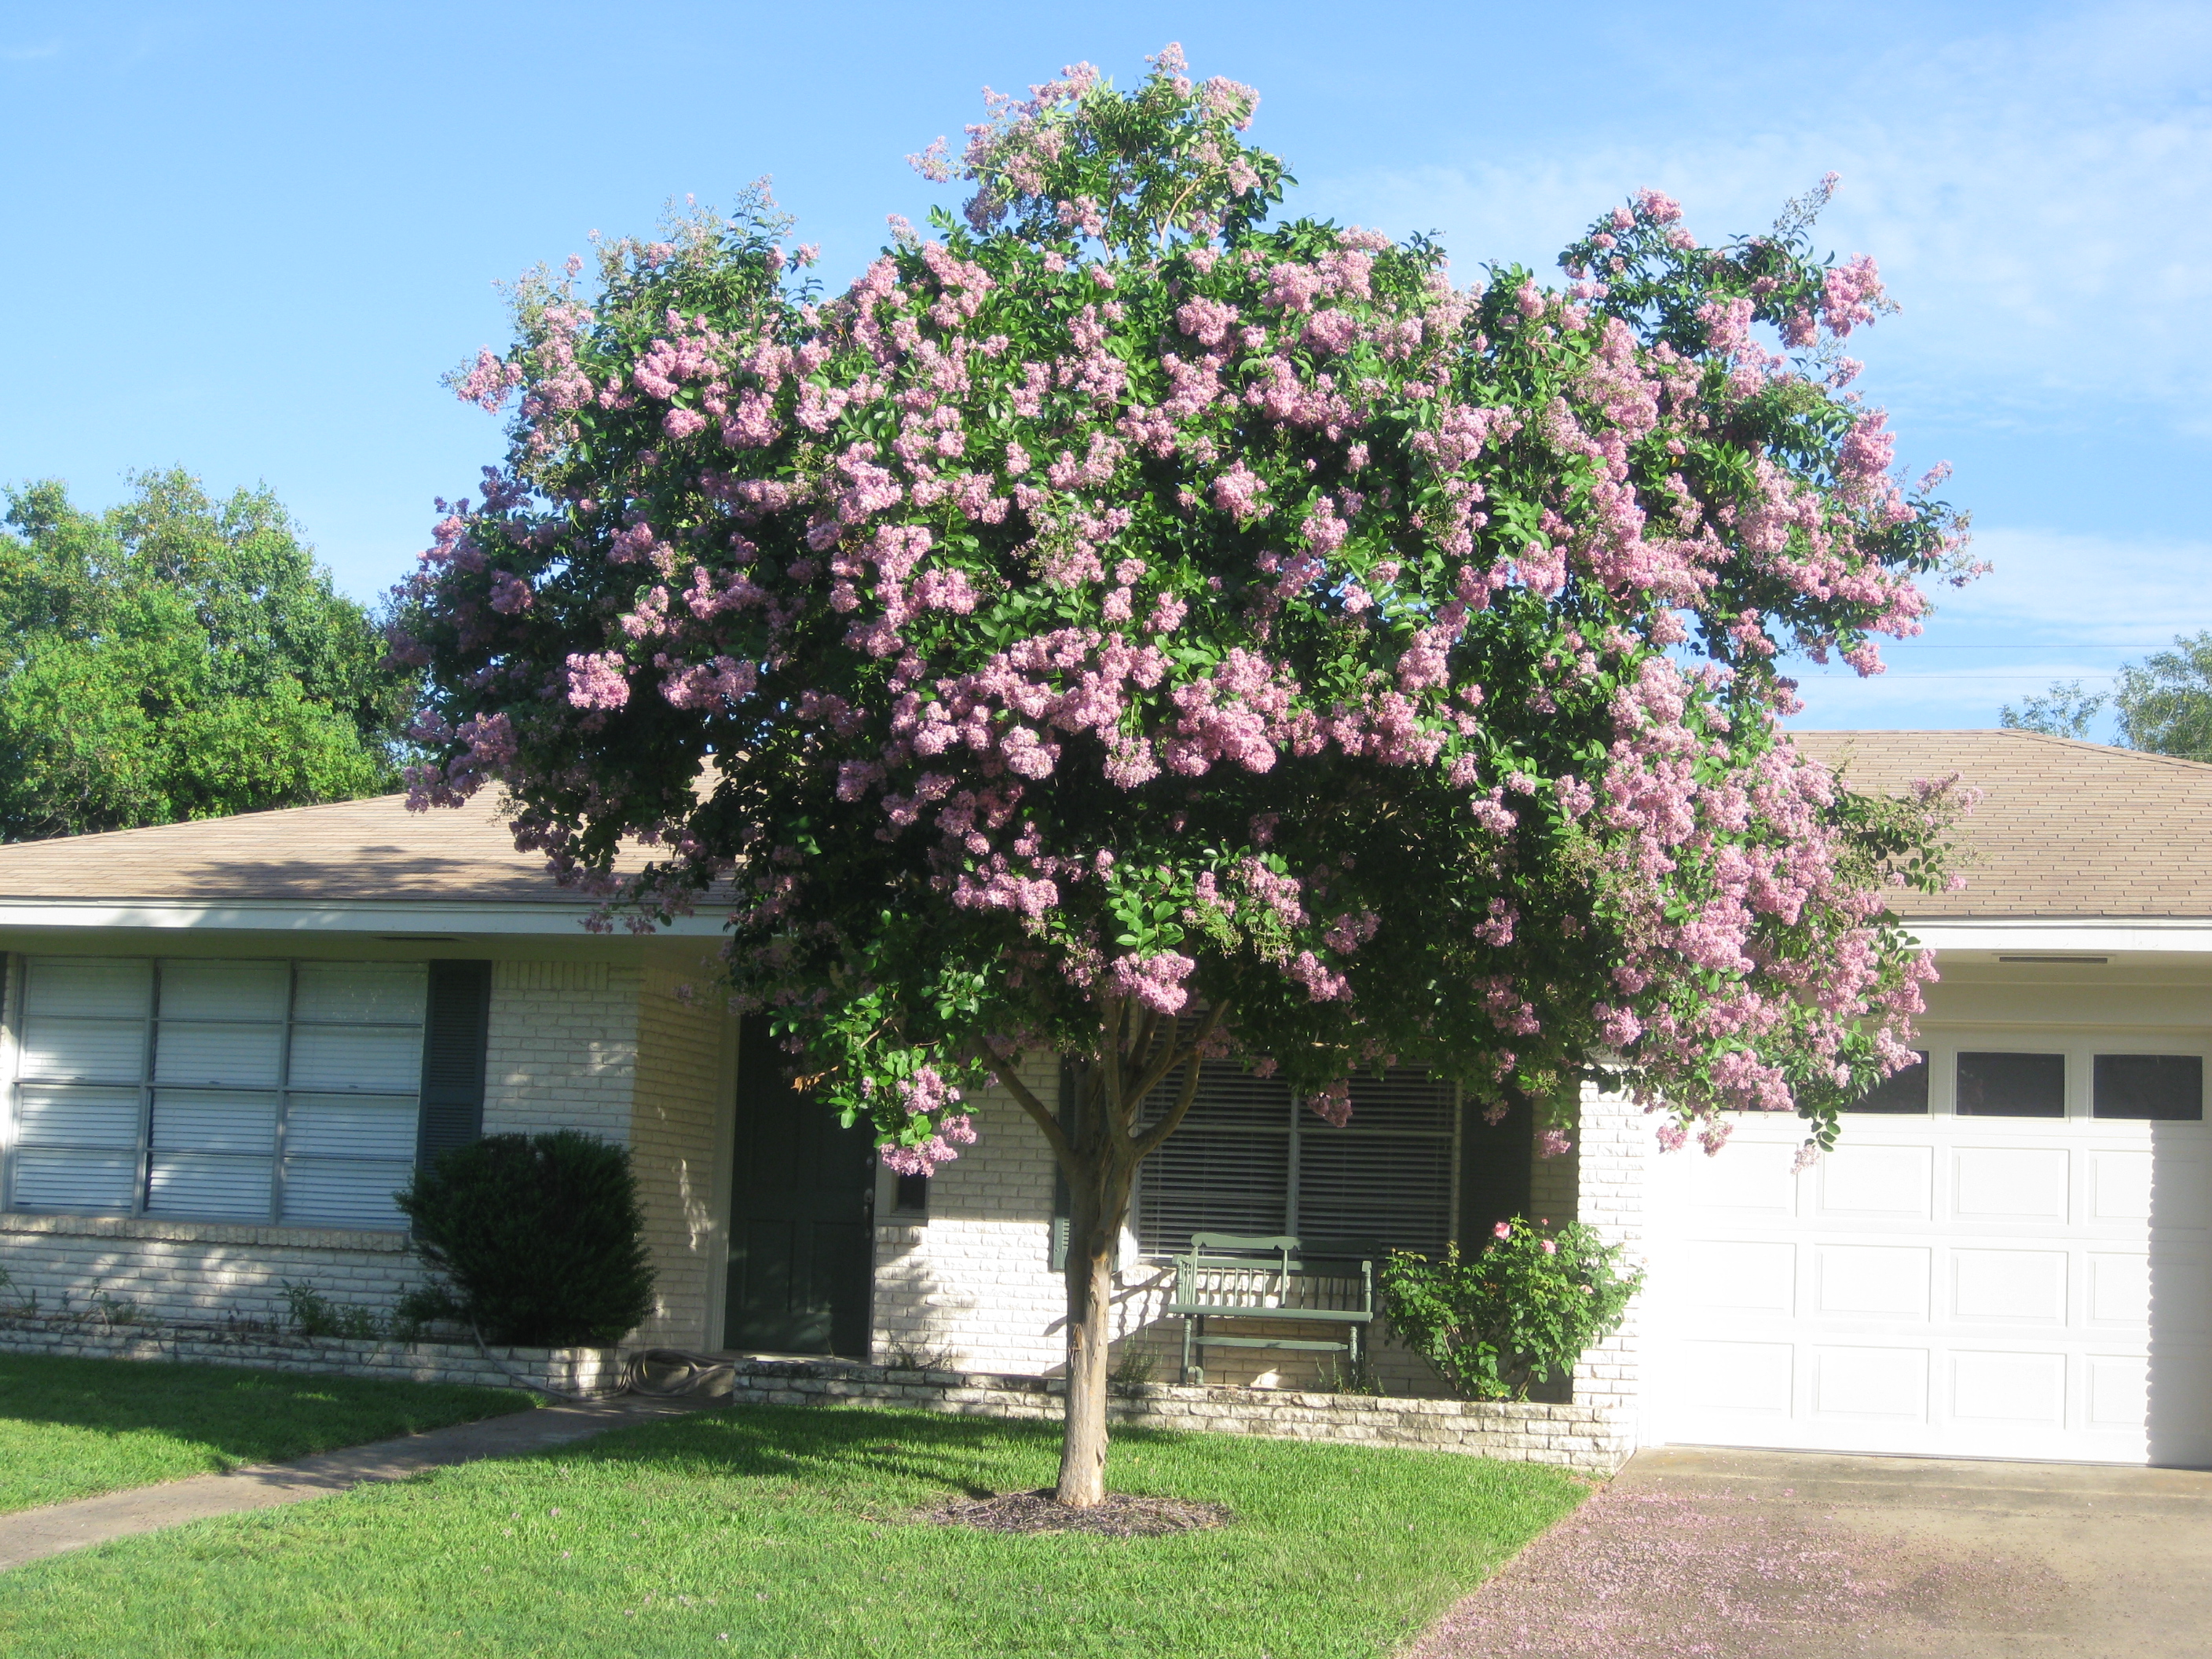 New Texas Superstar introduced: Basham's Party Pink crape myrtle ...